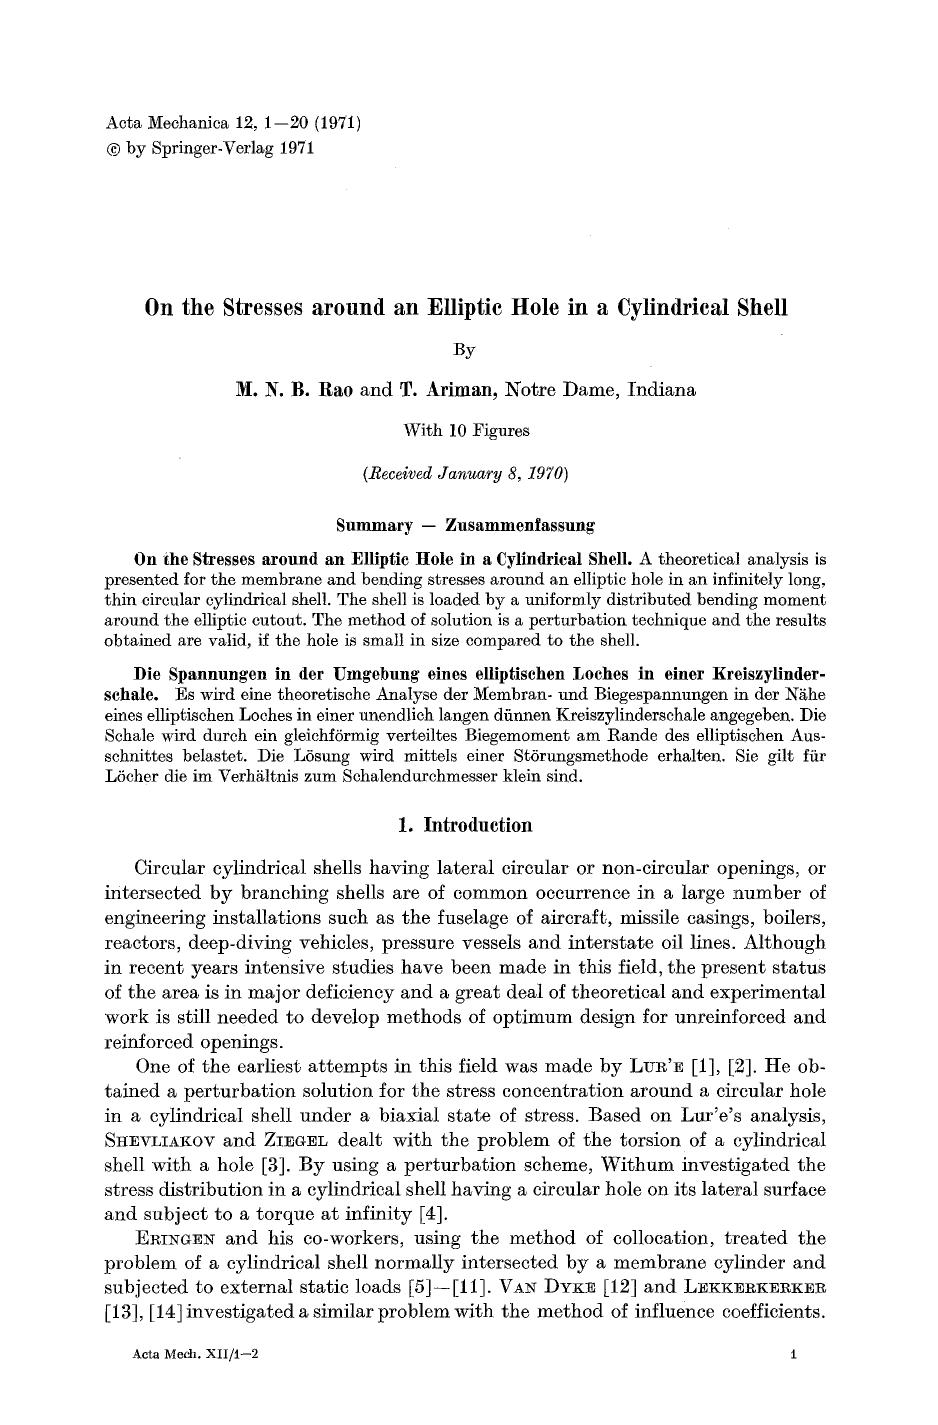 On the stresses around an elliptic hole in a cylindrical shell by Unknown